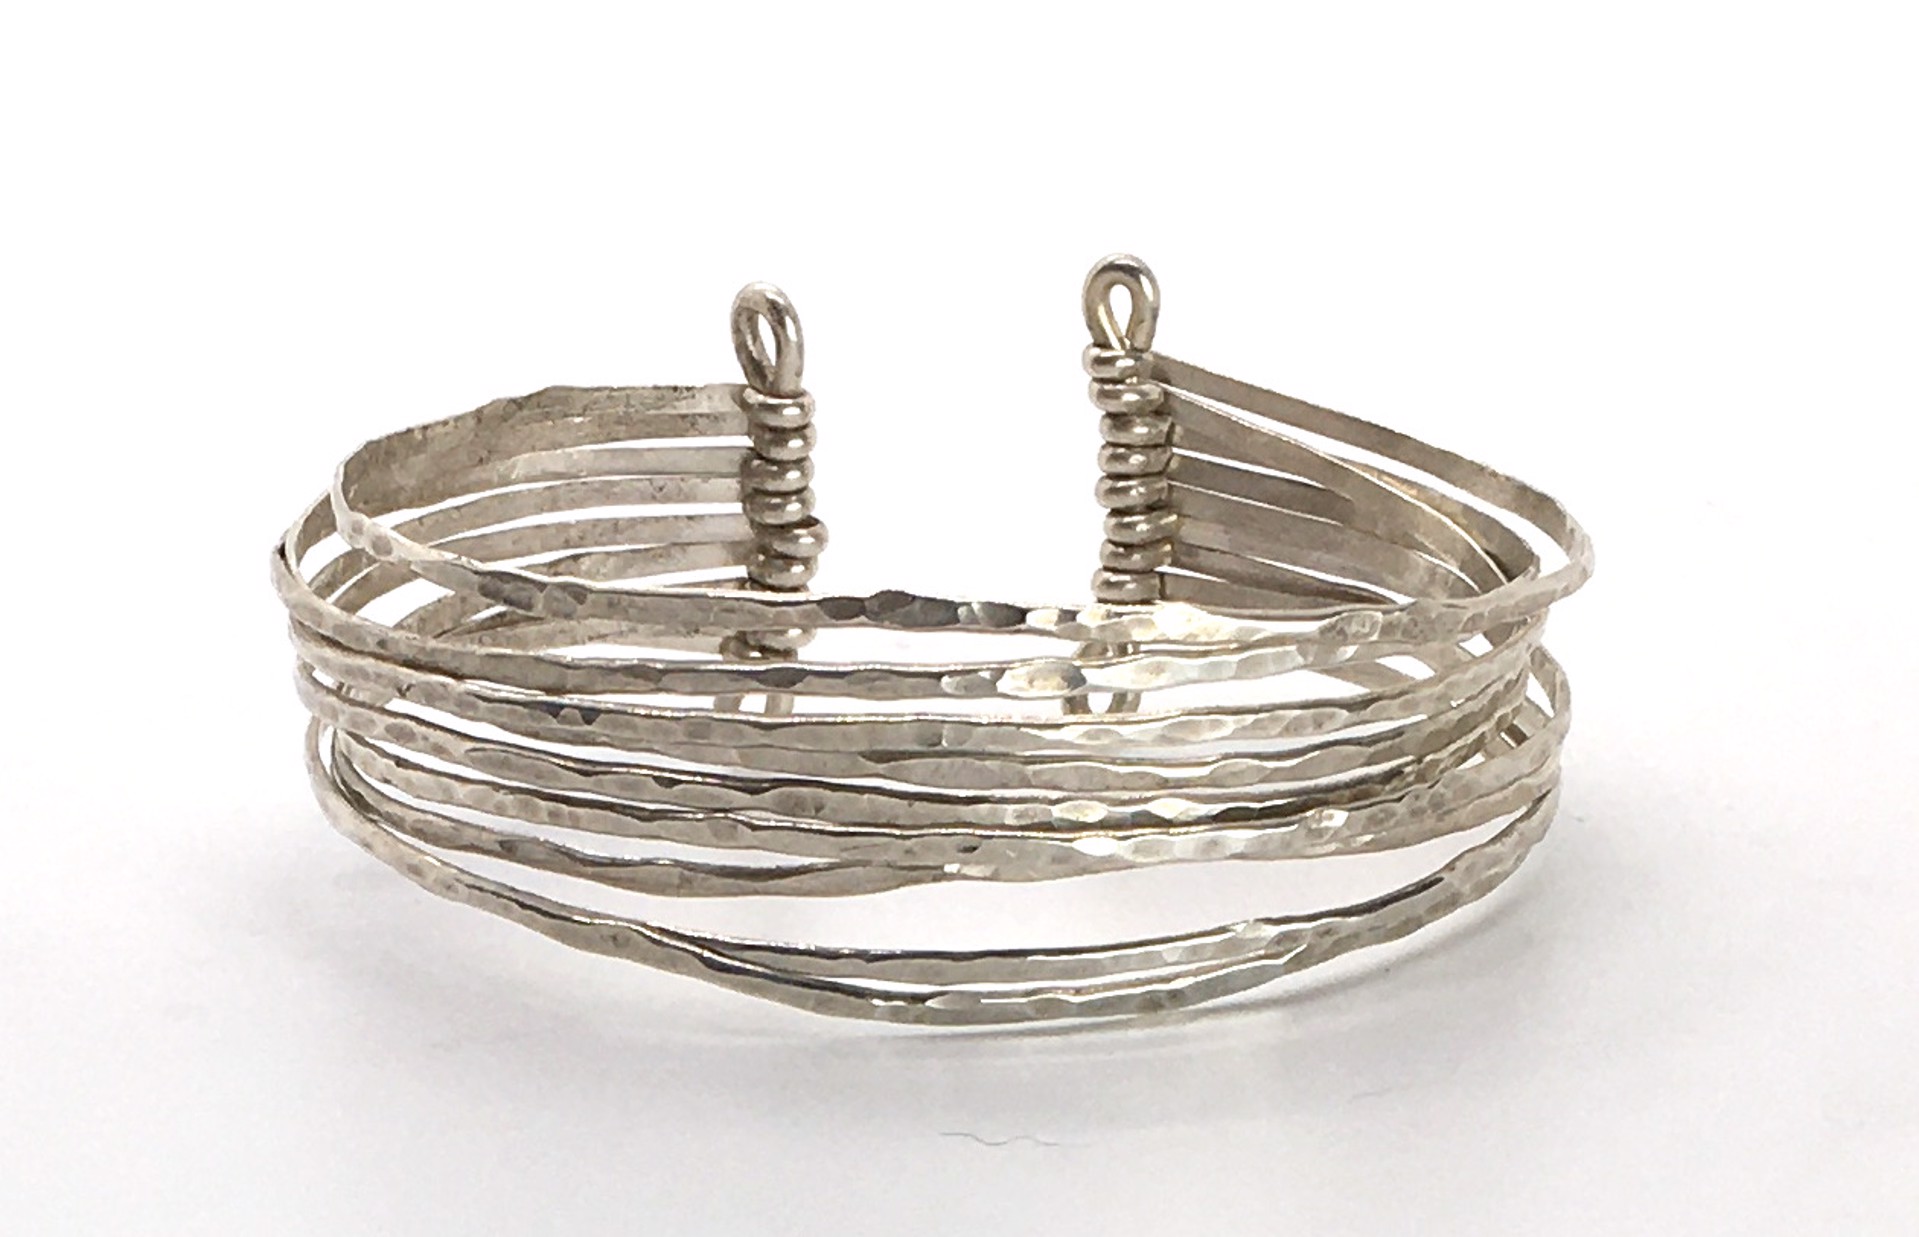 Bracelet - 9 Strand Hammered Sterling Silver Cuff by Suzanne Woodworth